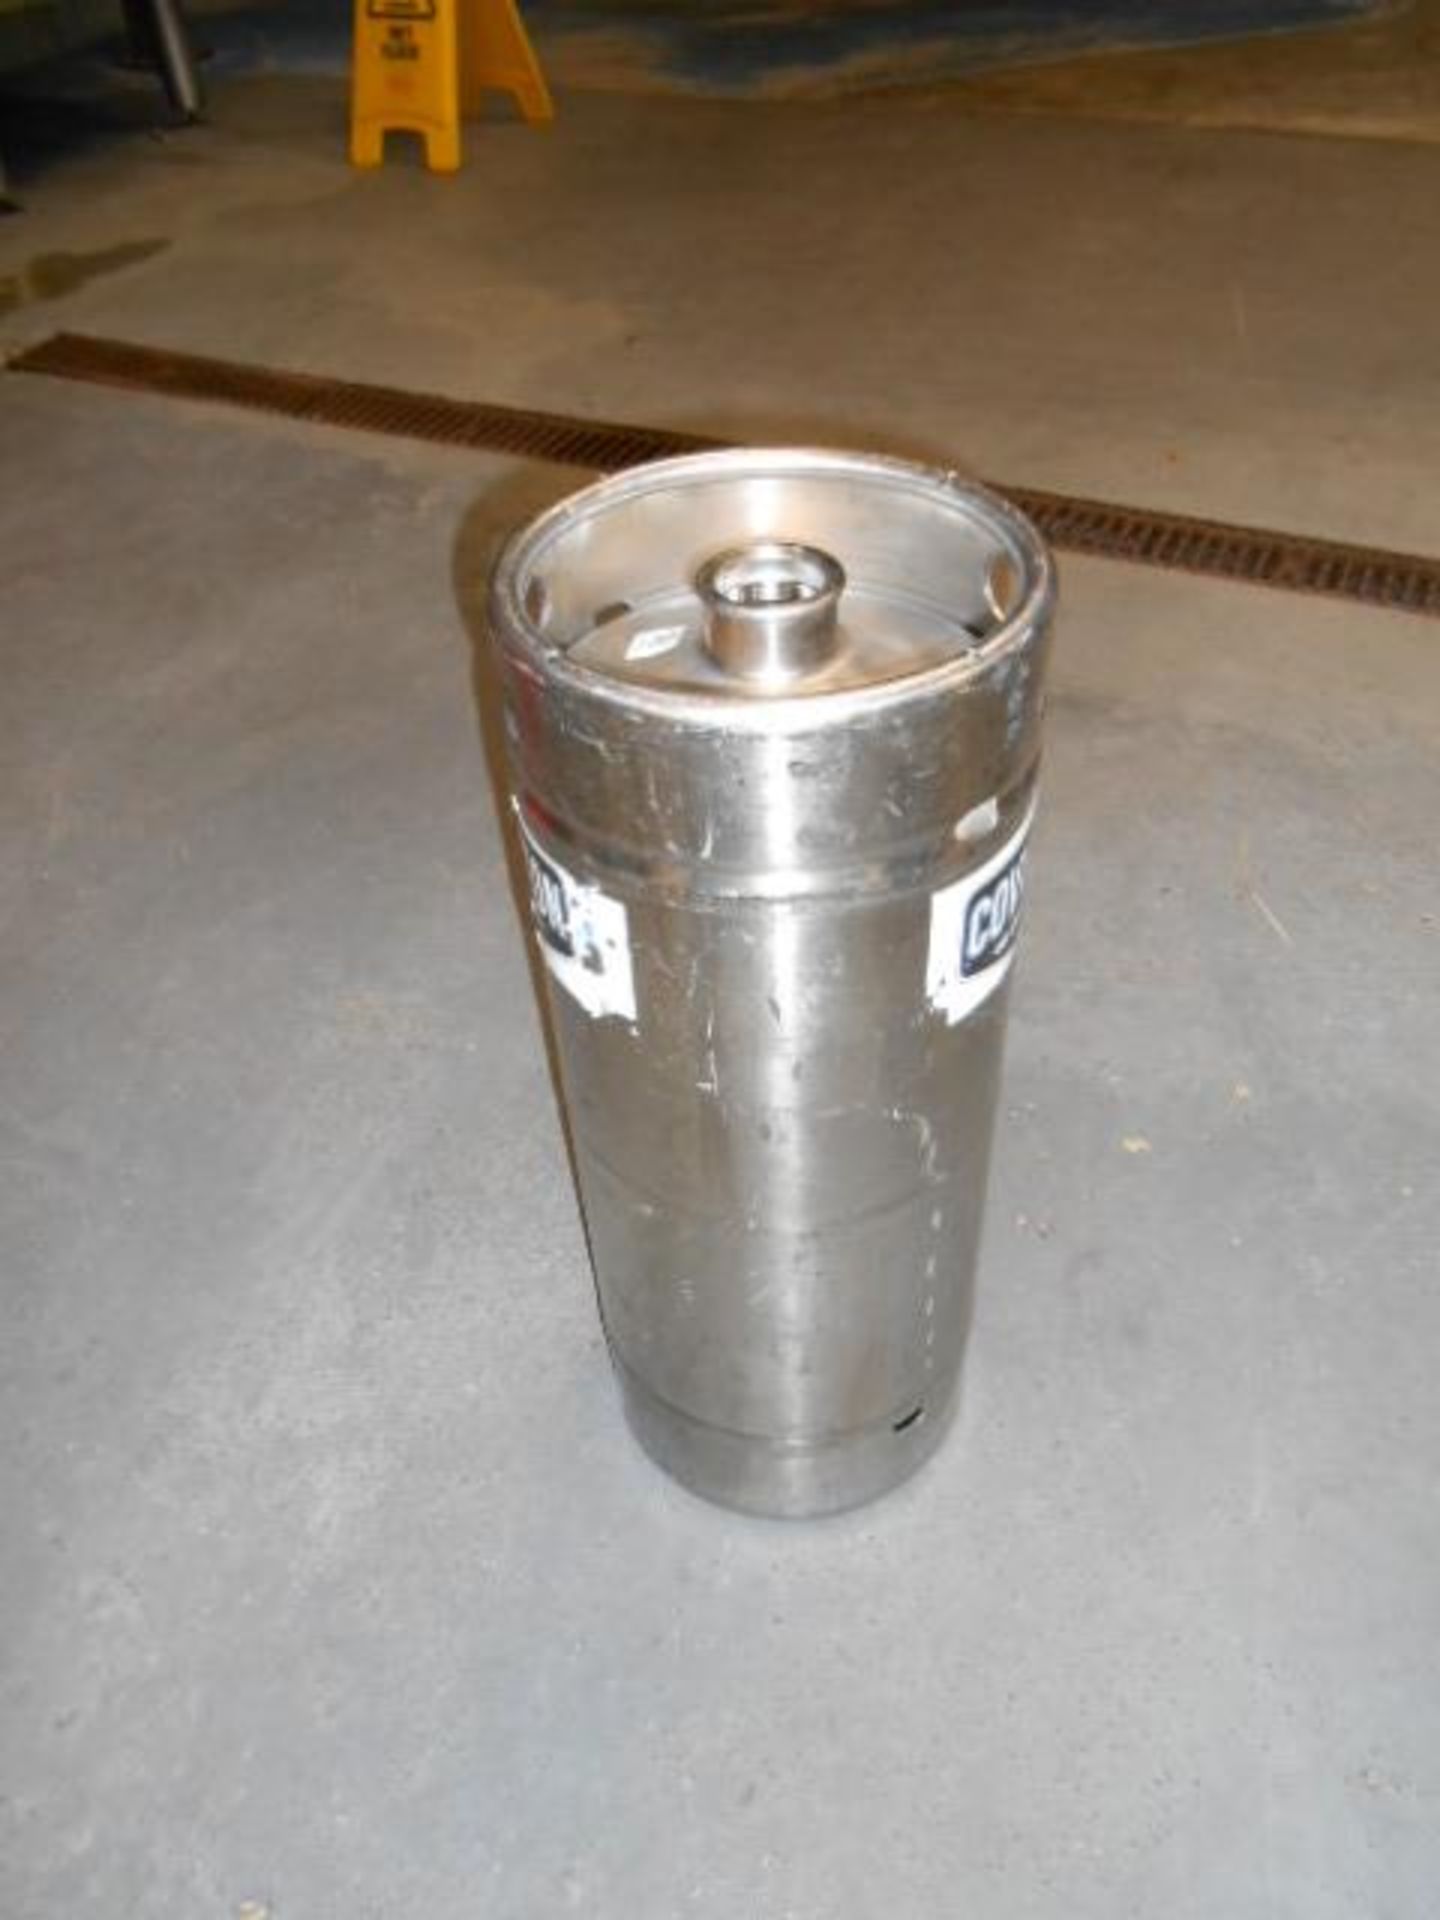 LOT of 60 1/6 barrel keg, Sanke connection ***NOTE FROM AUCTIONEER*** Rigging and Loading fee of